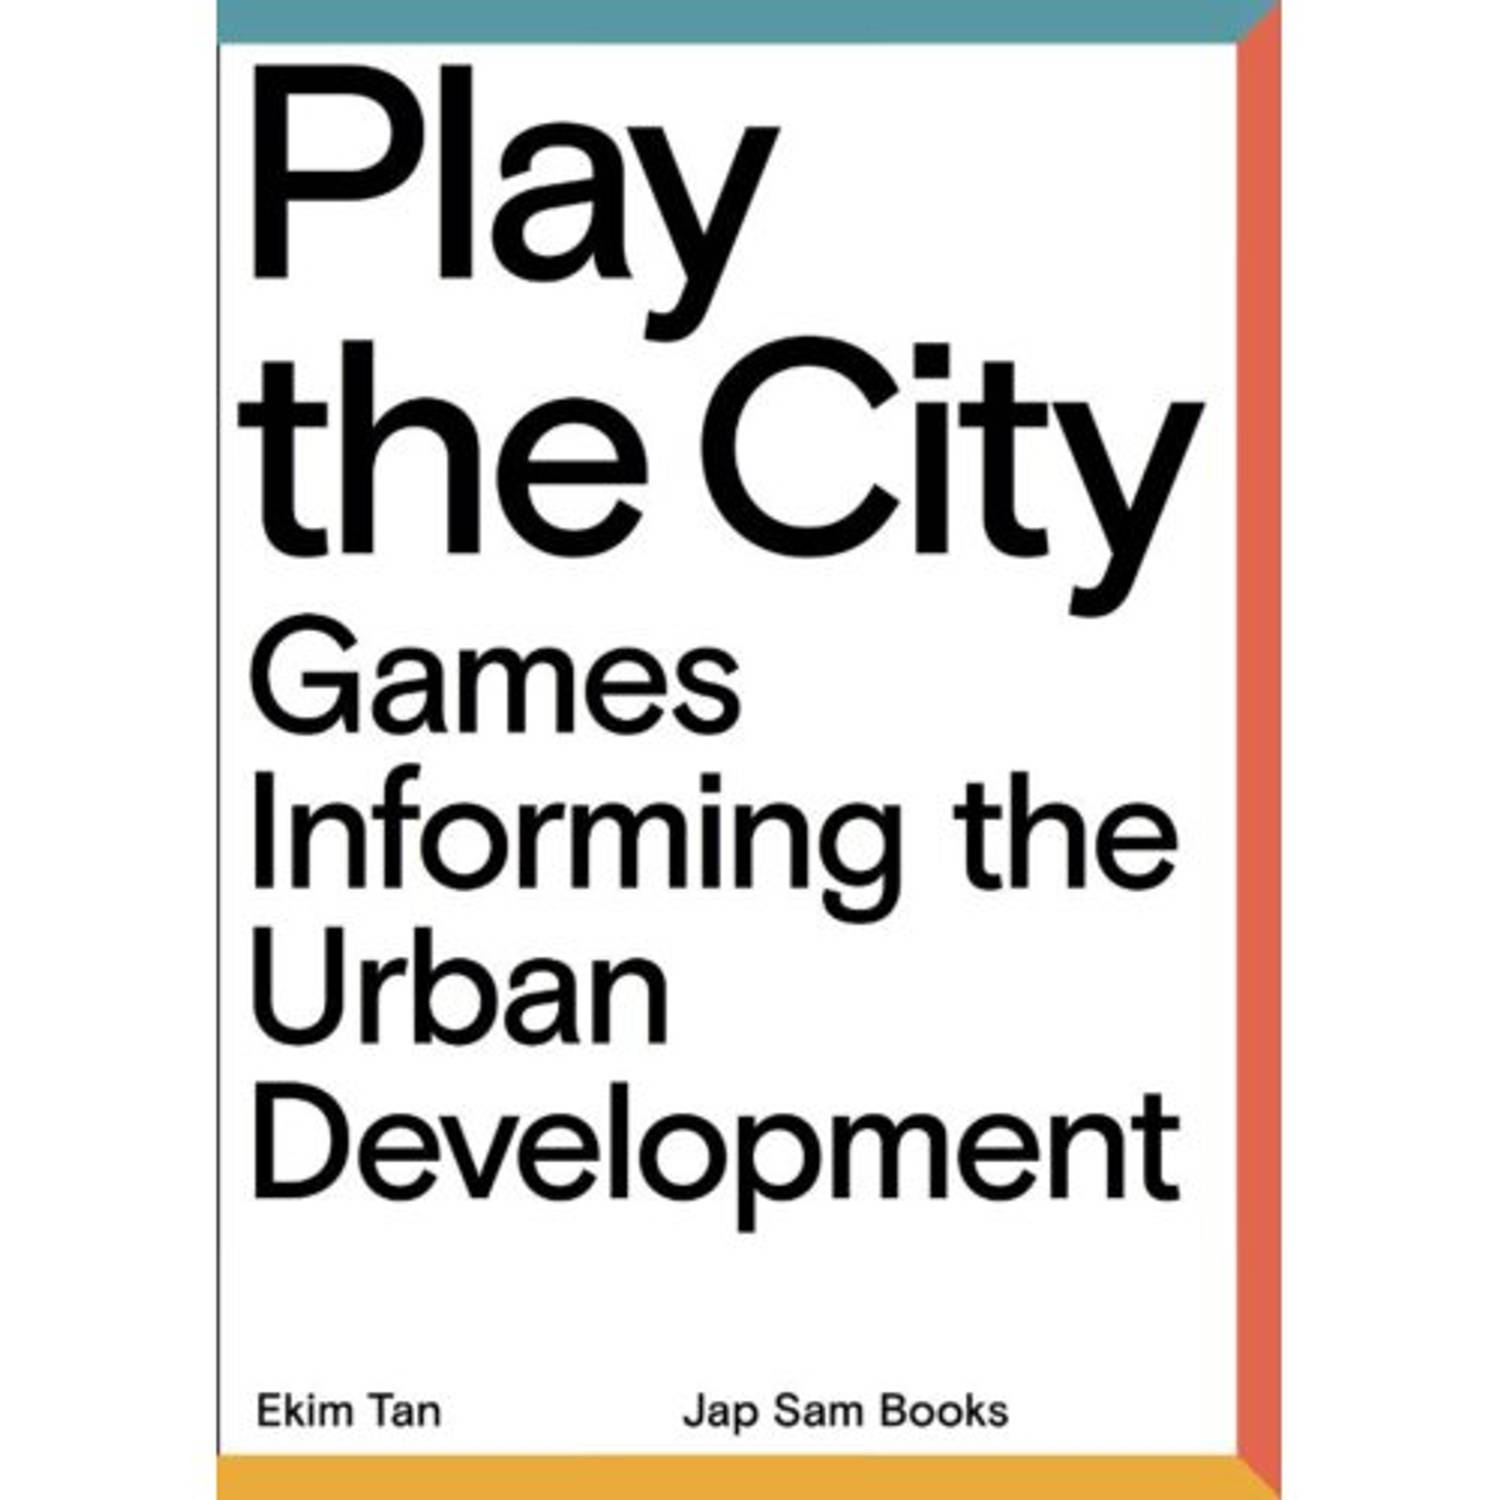 PLAY THE CITY